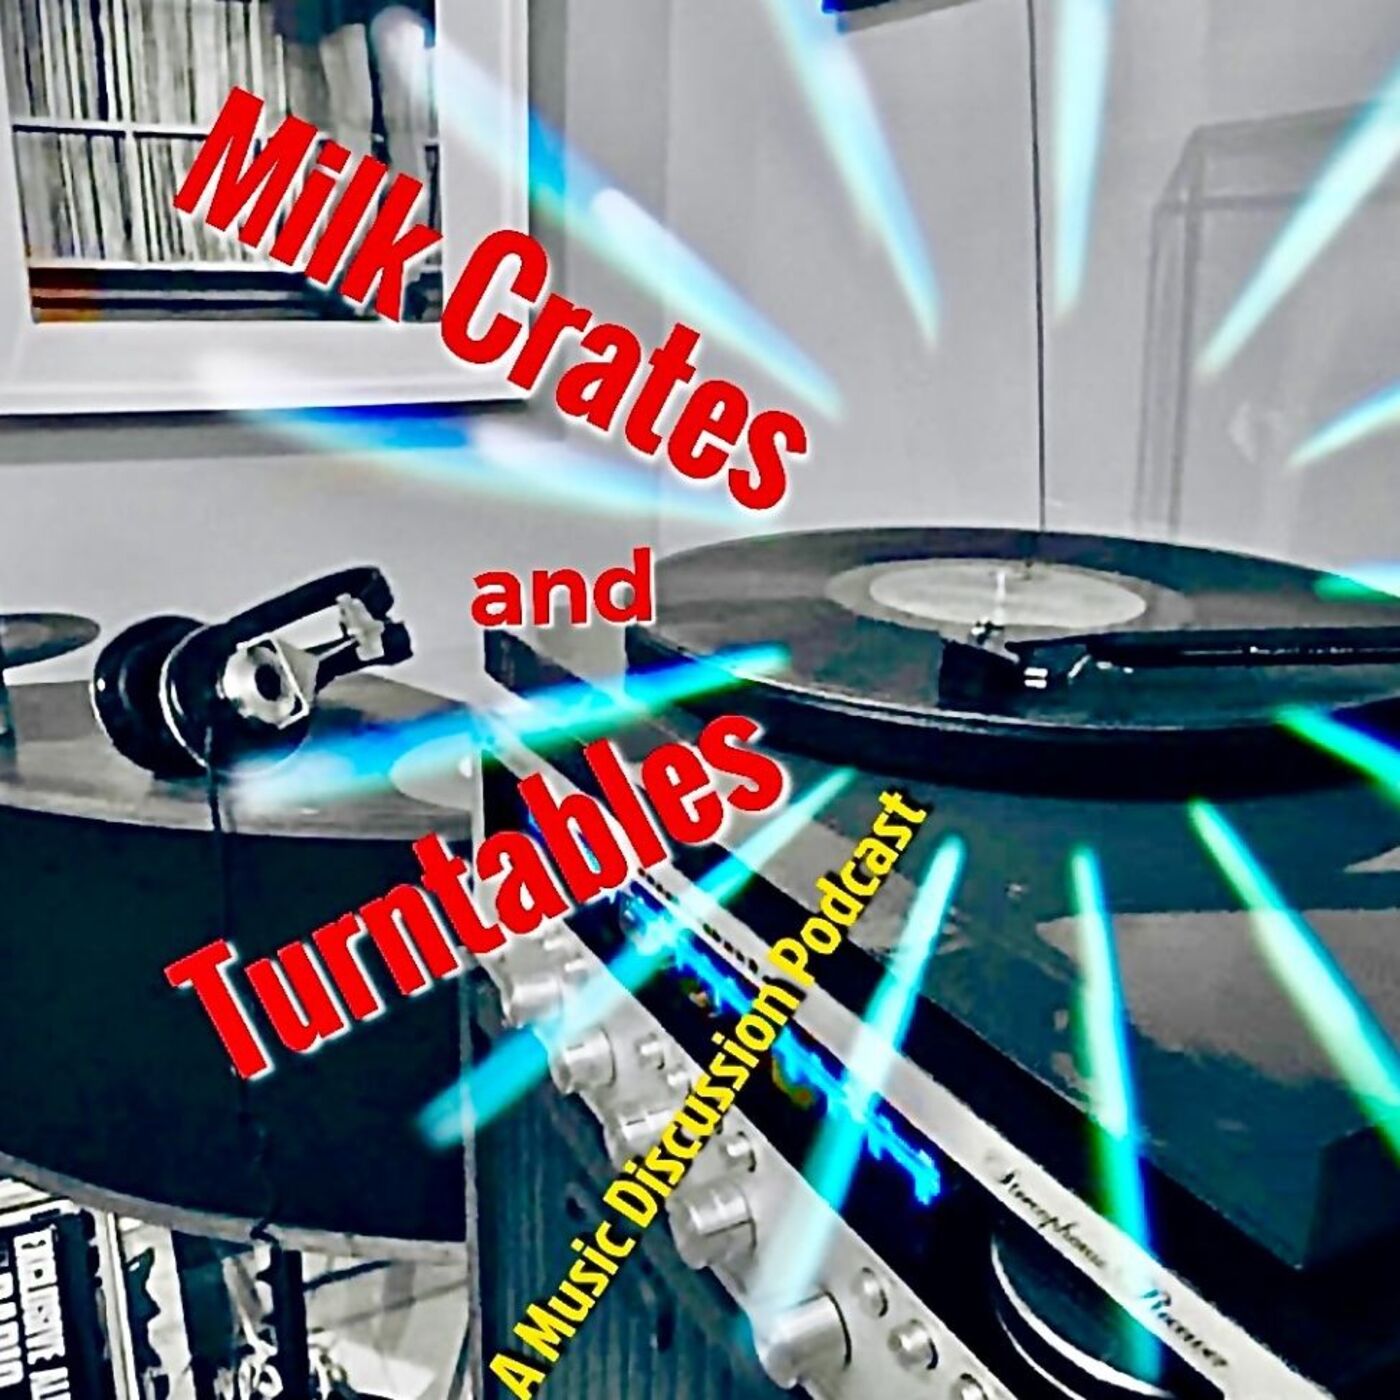 Fresh update on "riverside" discussed on Milk Crates and Turntables. A Music Discussion Podcast